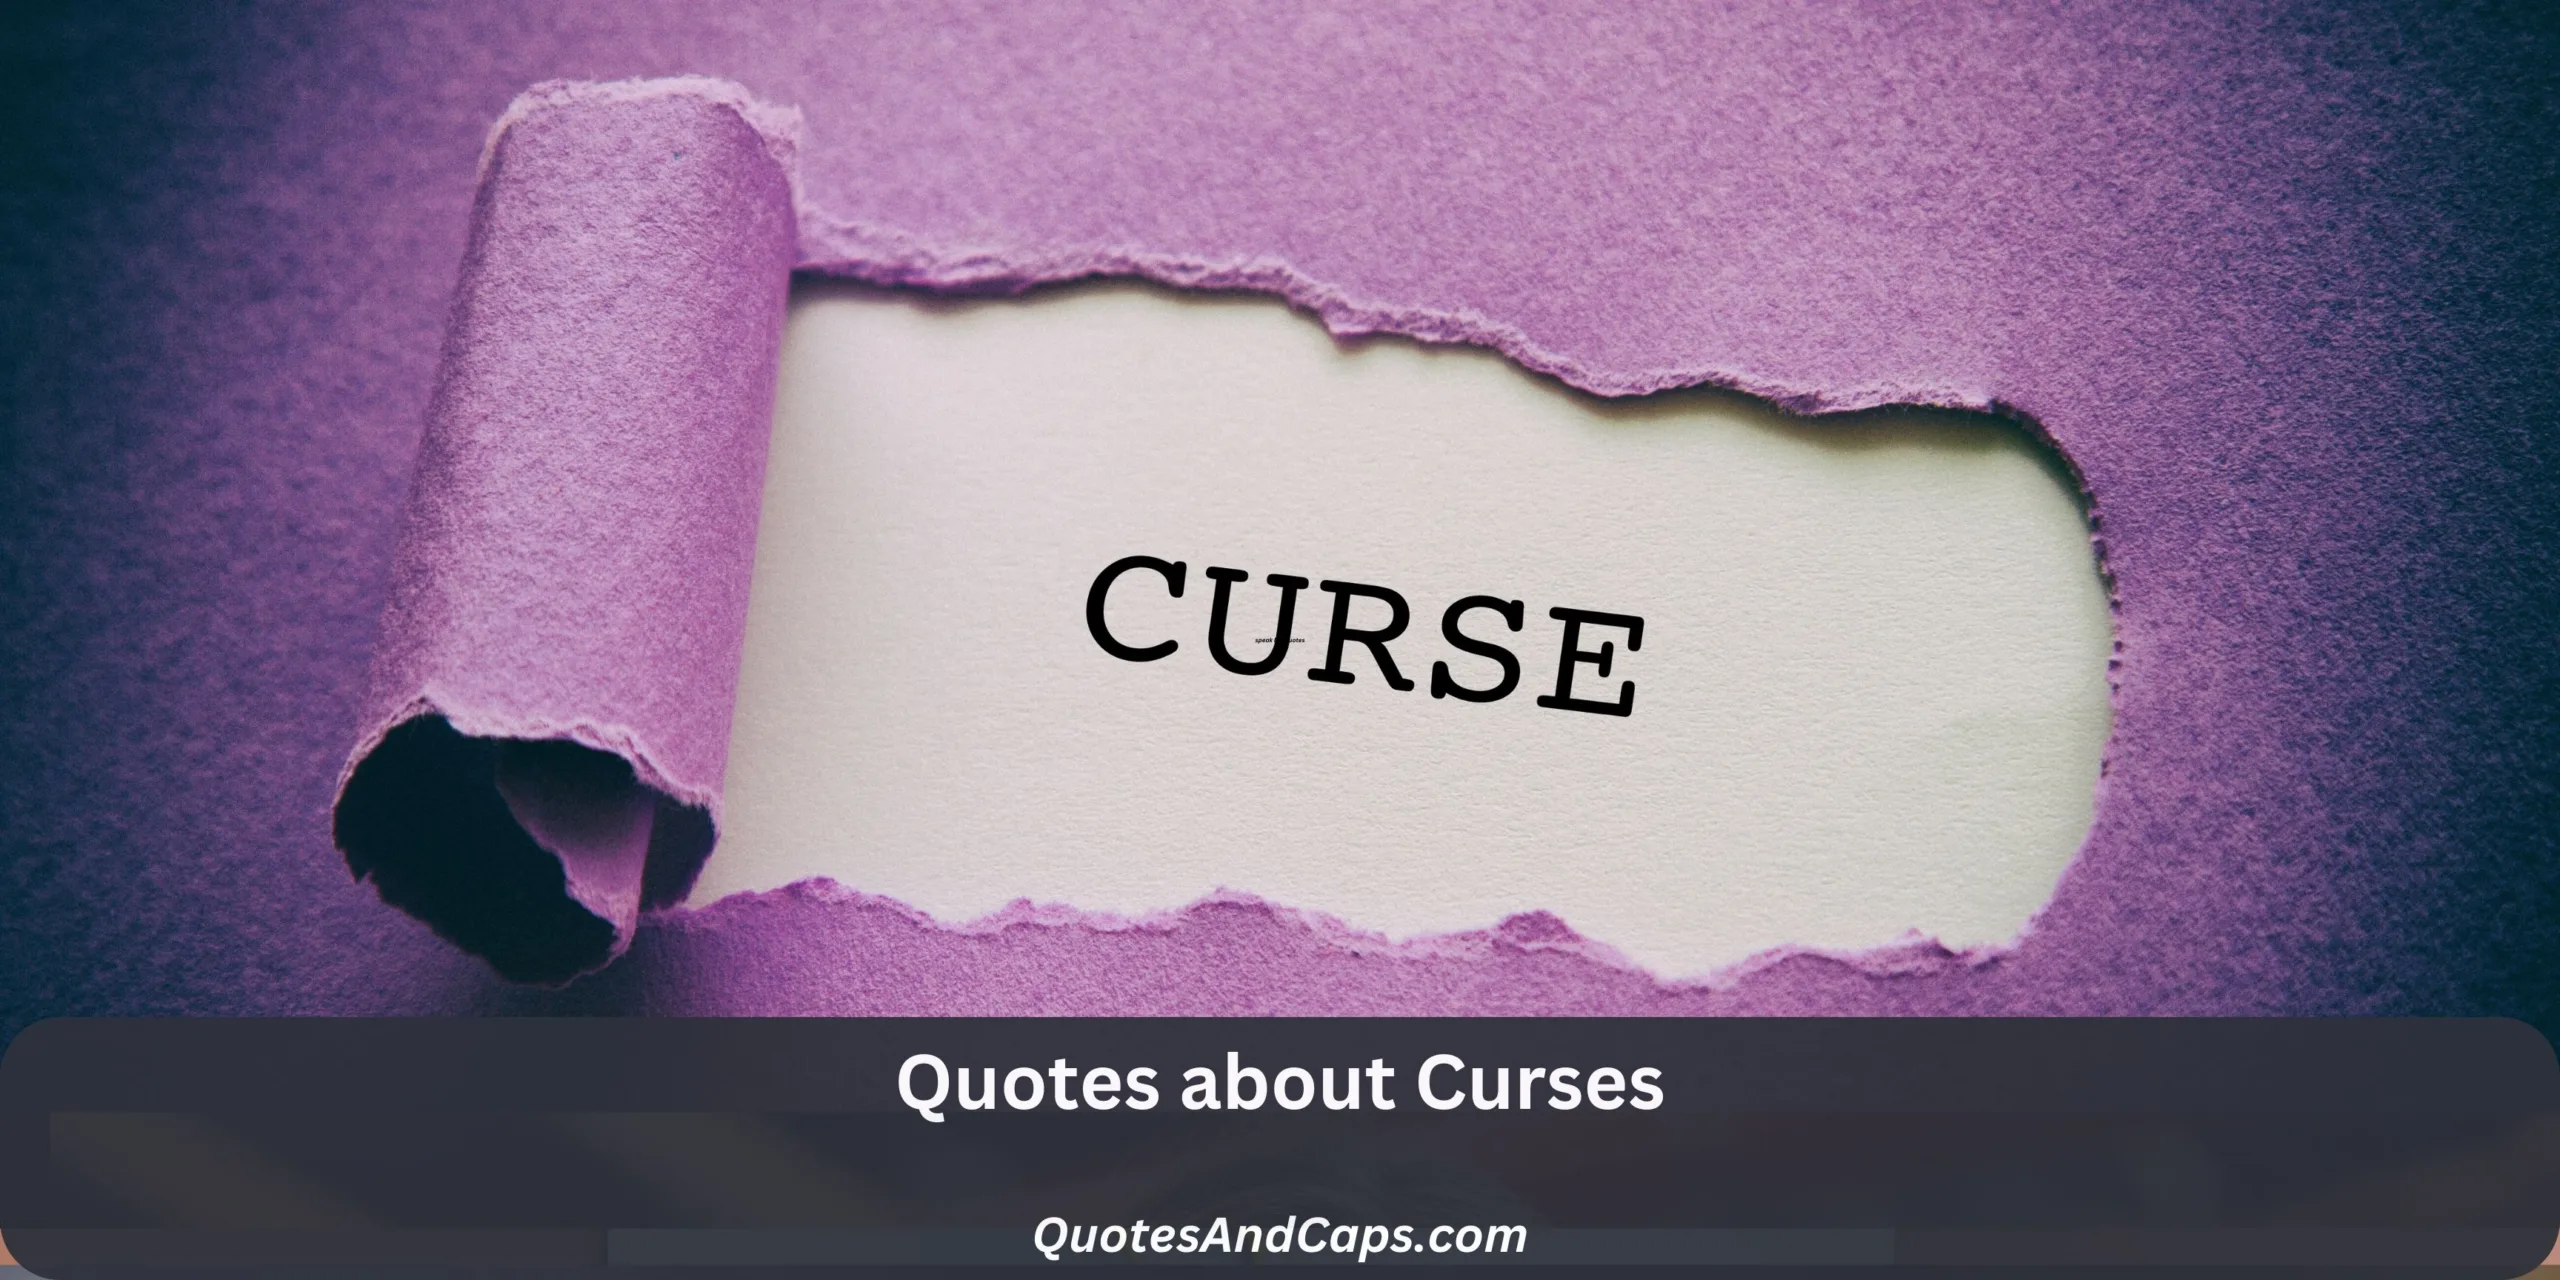 Quotes about Curses